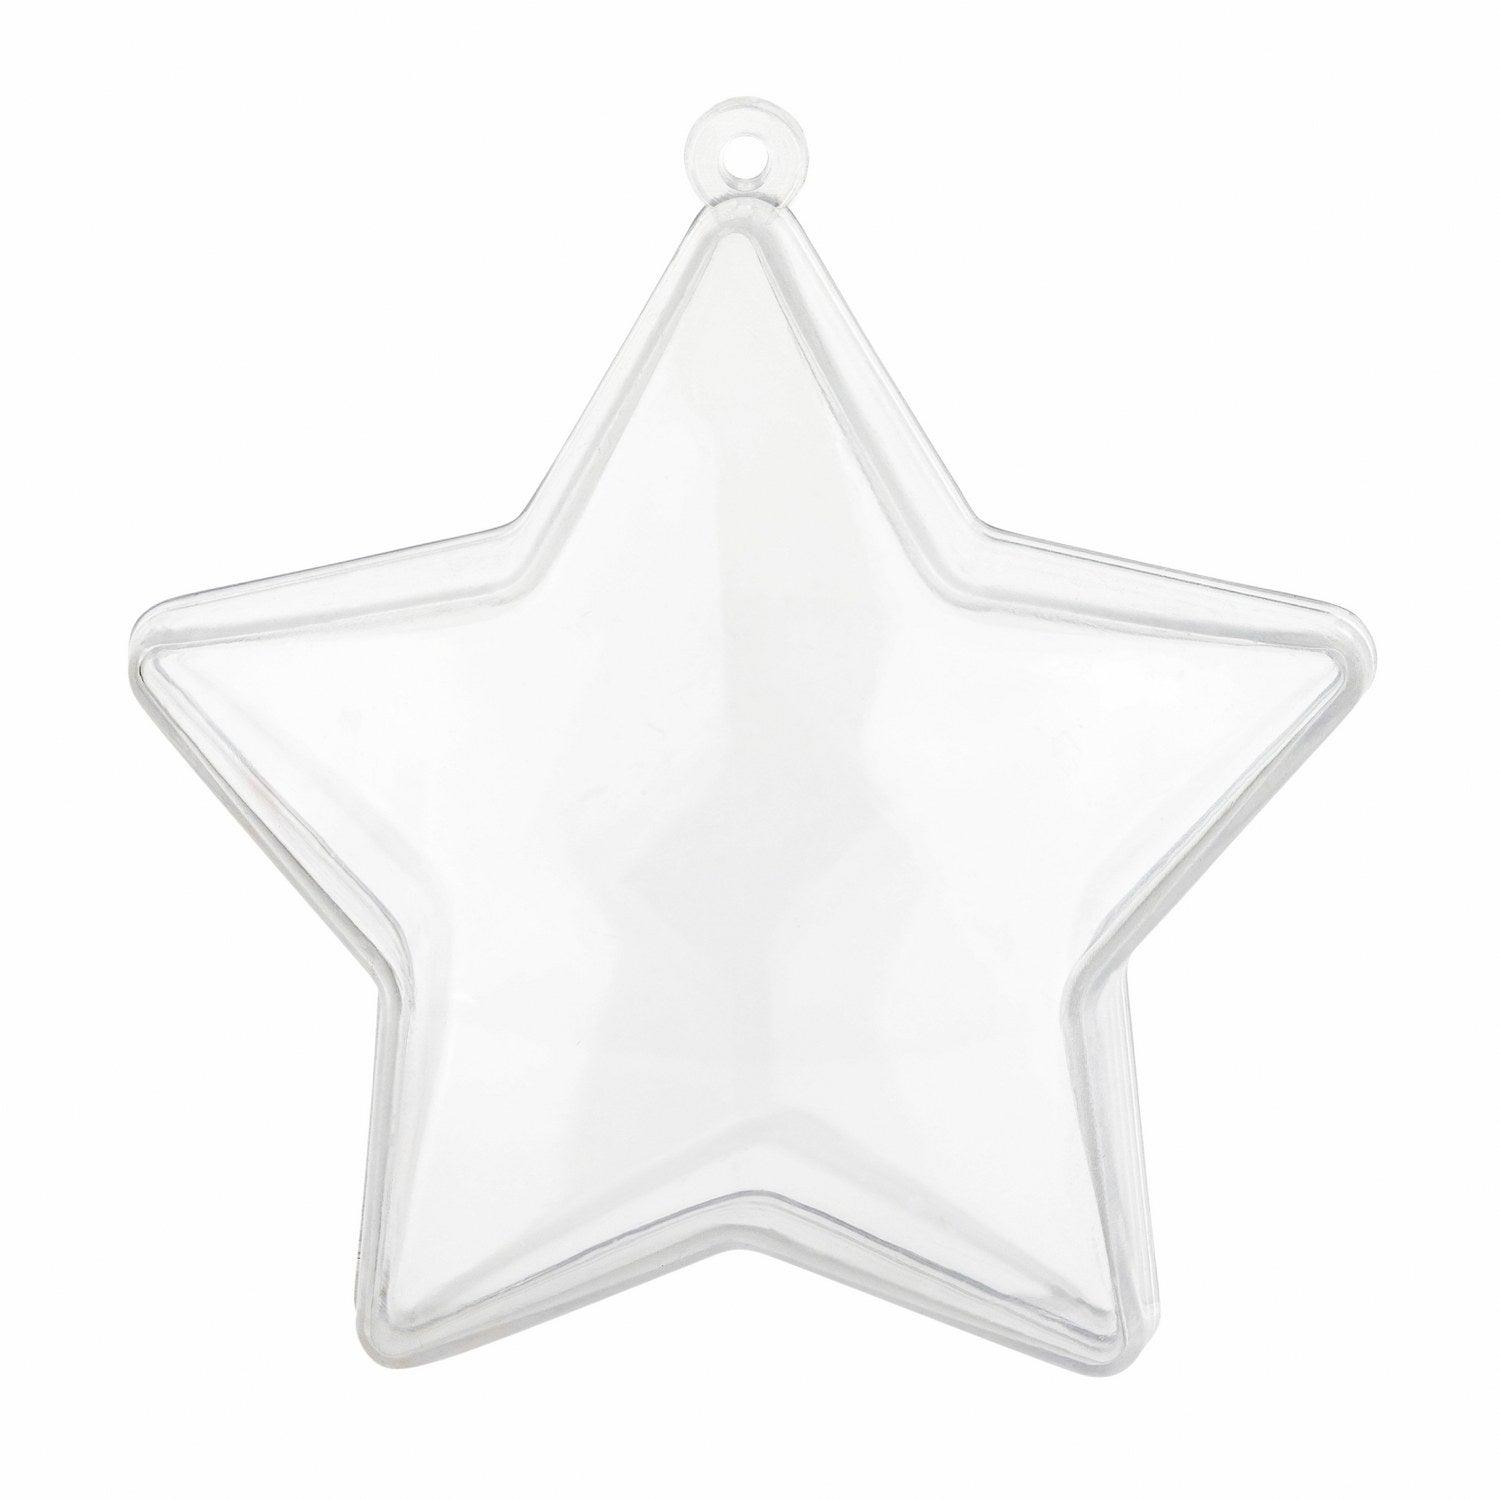 Star Shaped Acrylic Candy Boxes 24 Pack 2.95"X1.25" | Amazing Pinatas 